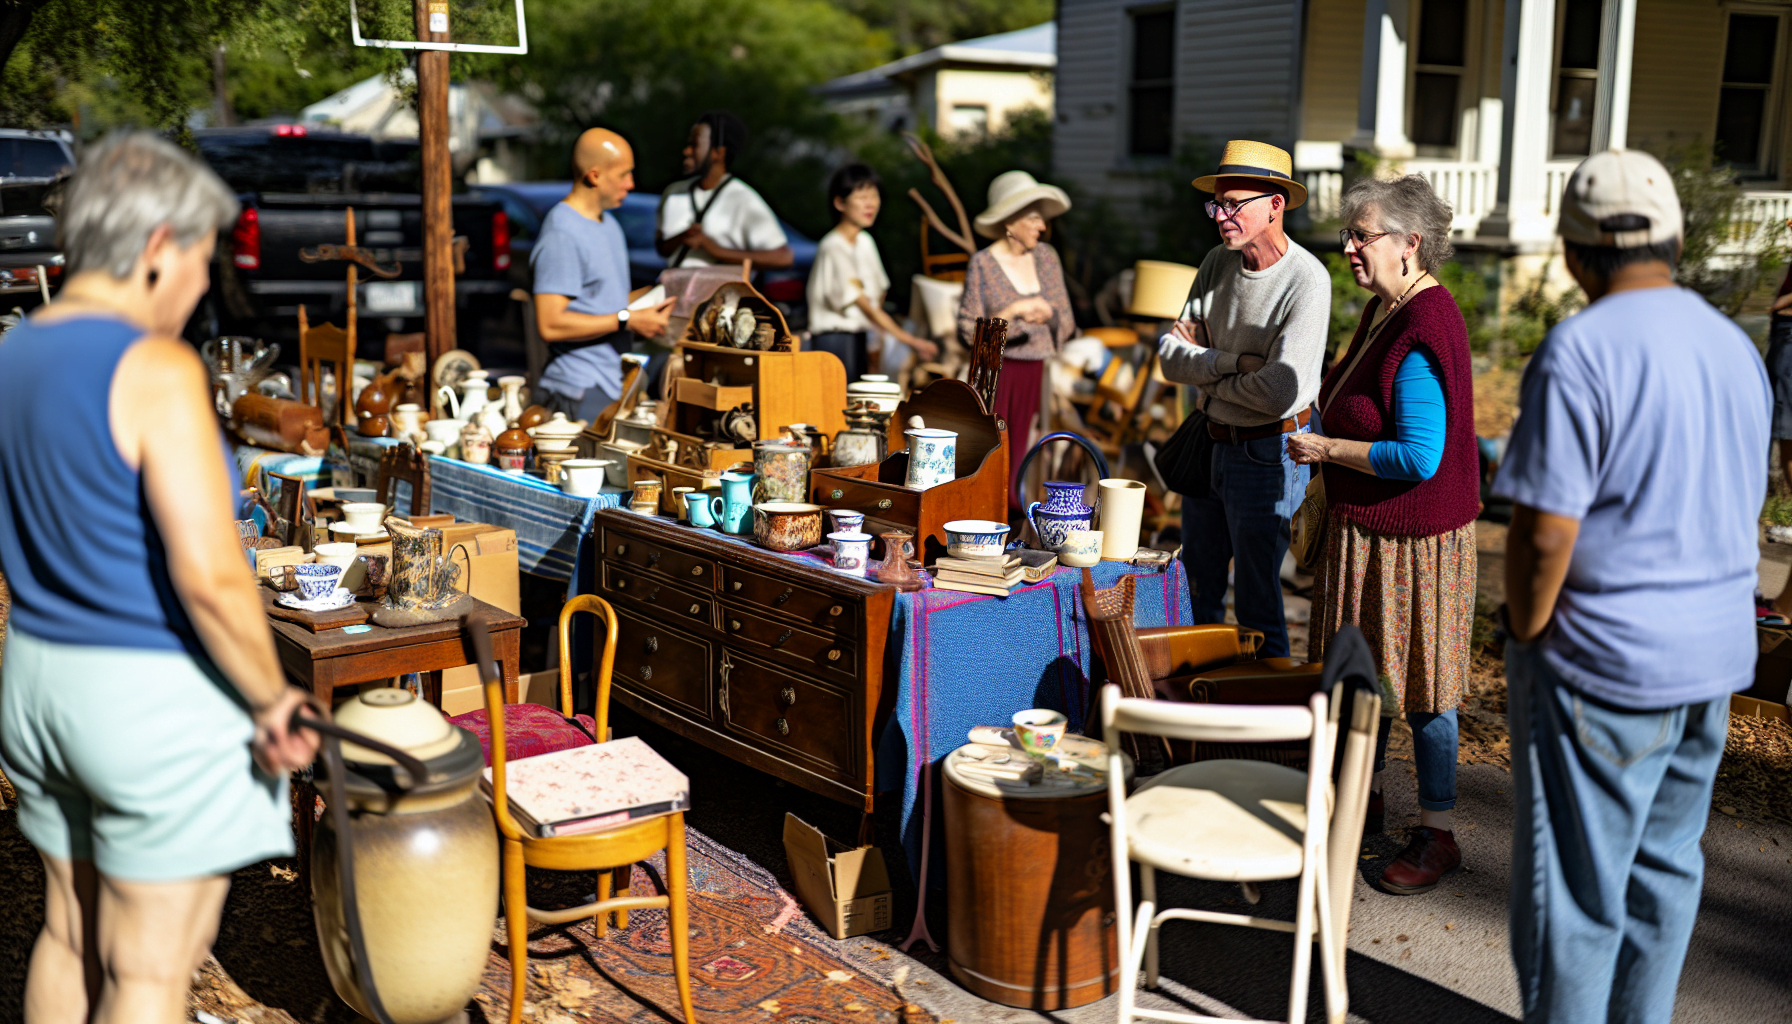 Yard sale with various household items displayed